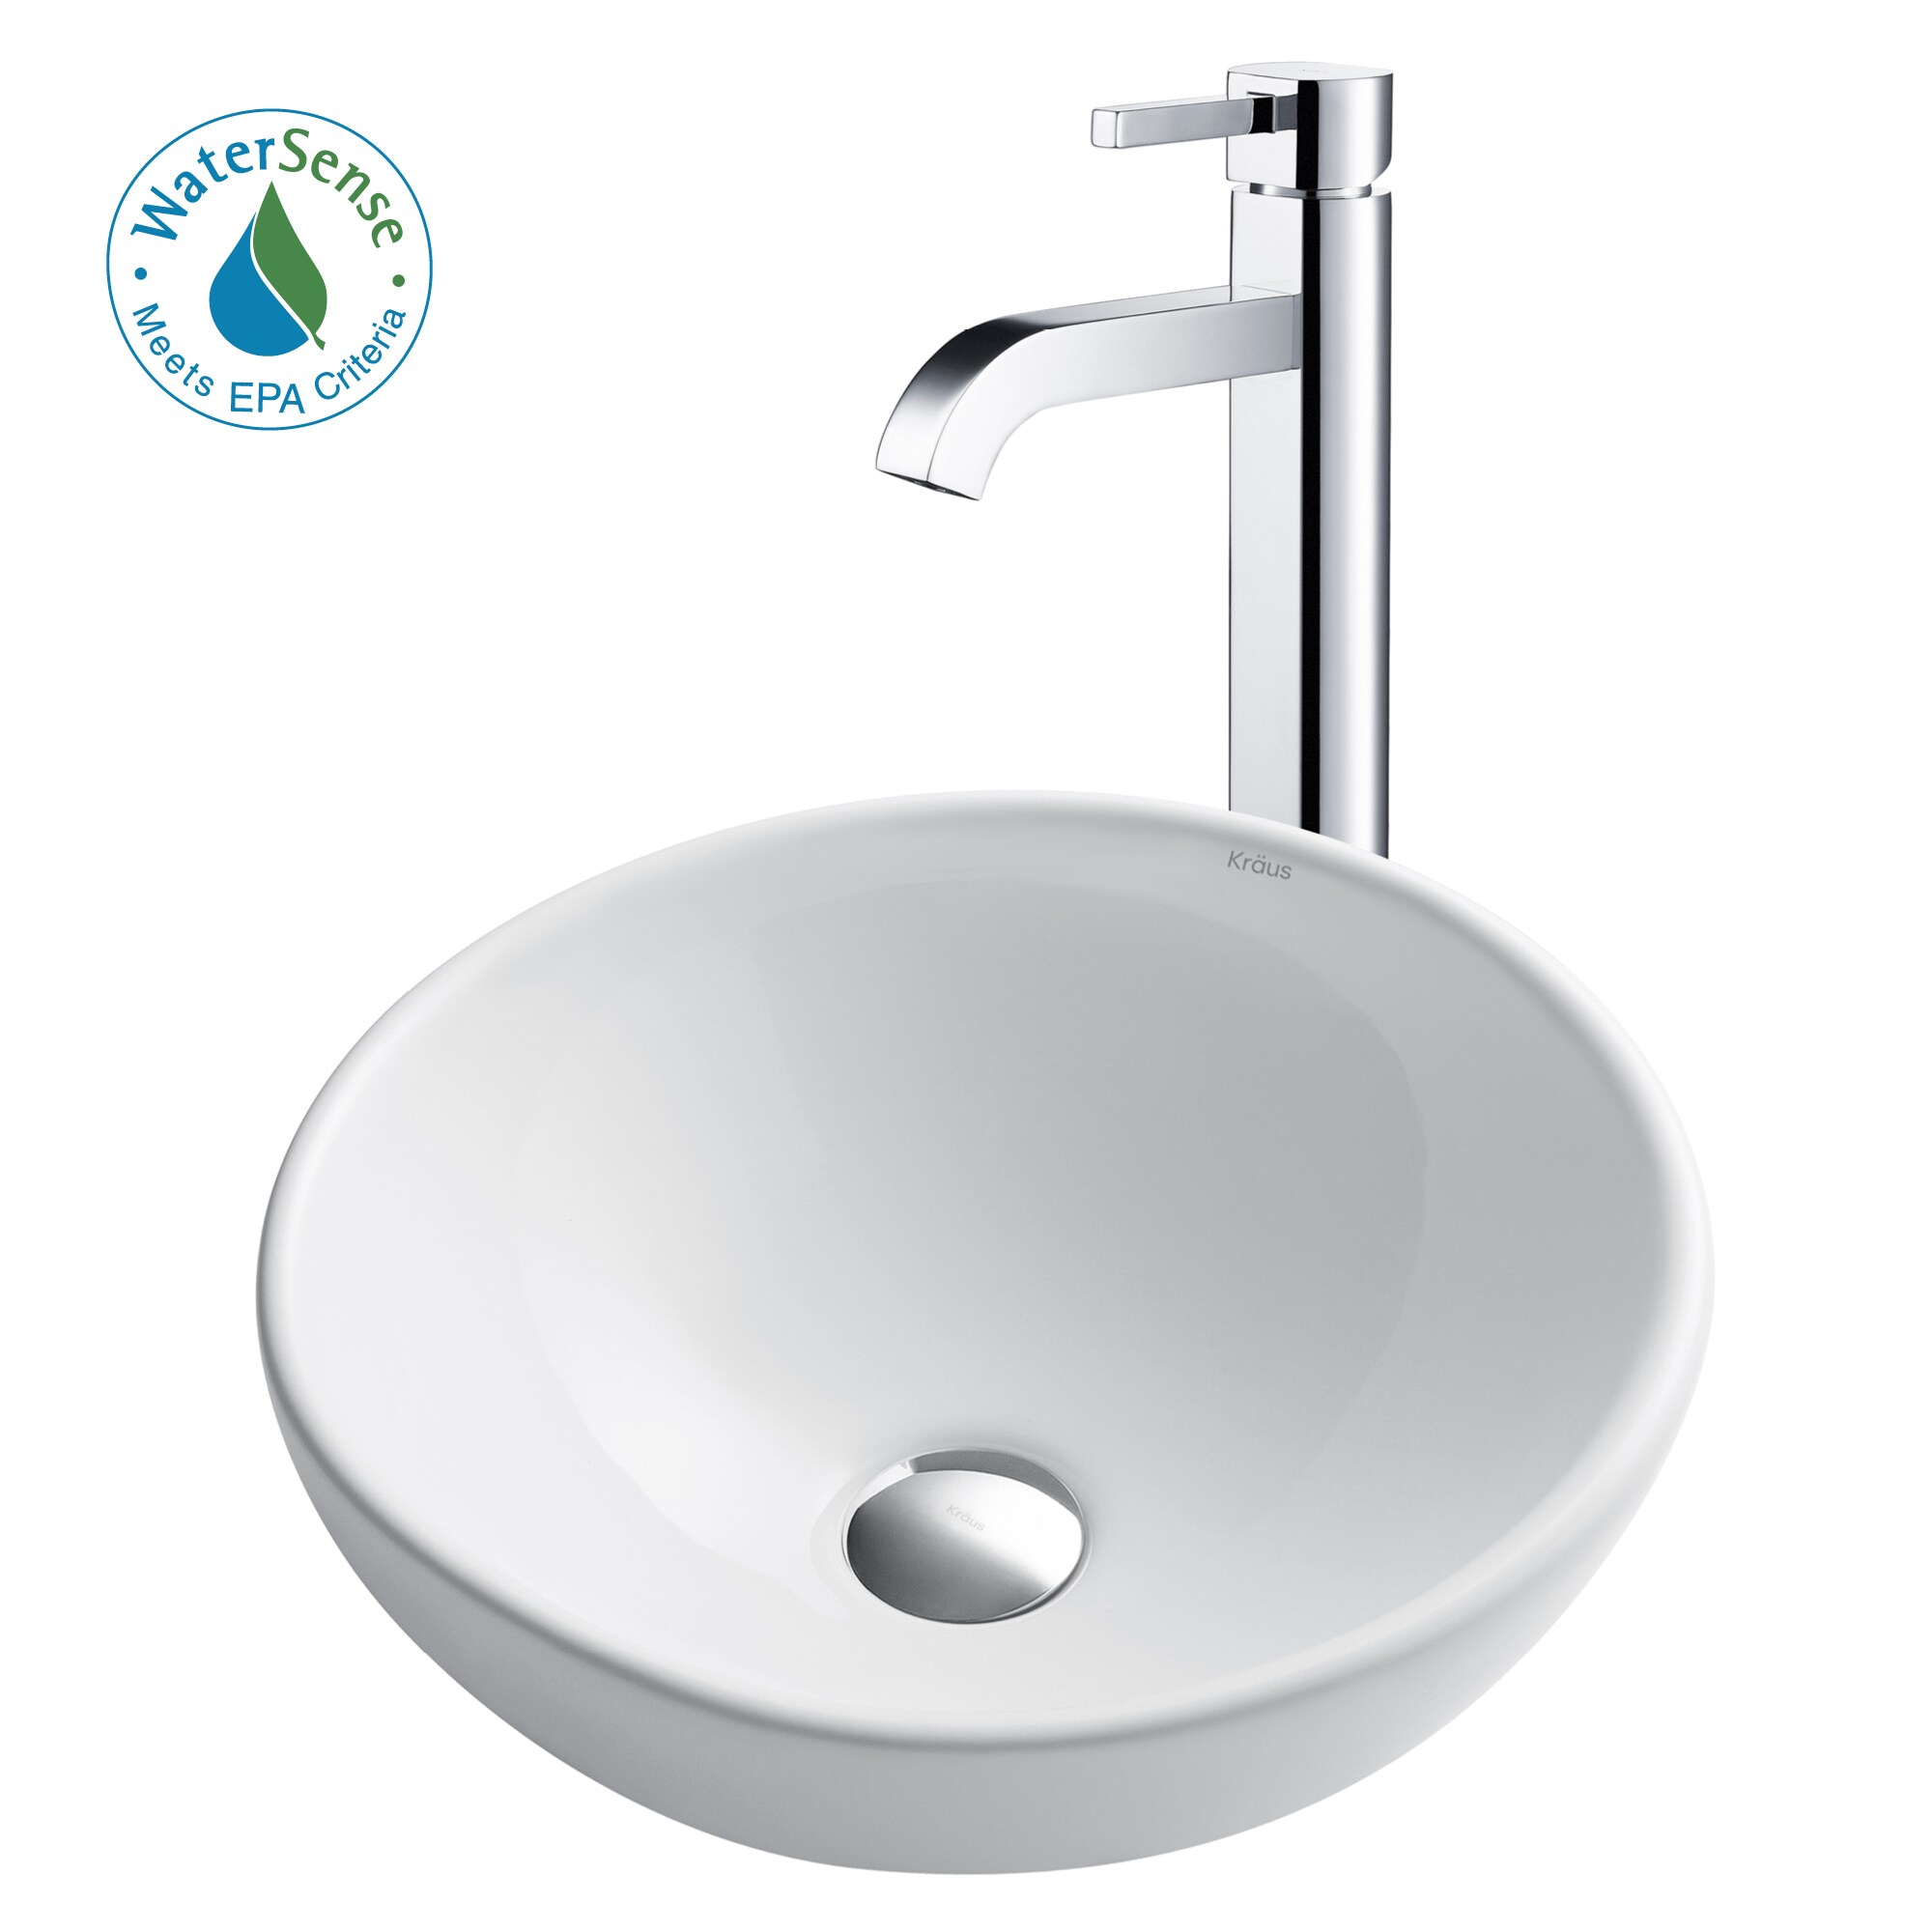 Kraus Chrome Ceramic Vessel Round Modern Bathroom Sink with Faucet Drain Included (15.7-in x 15.7-in)